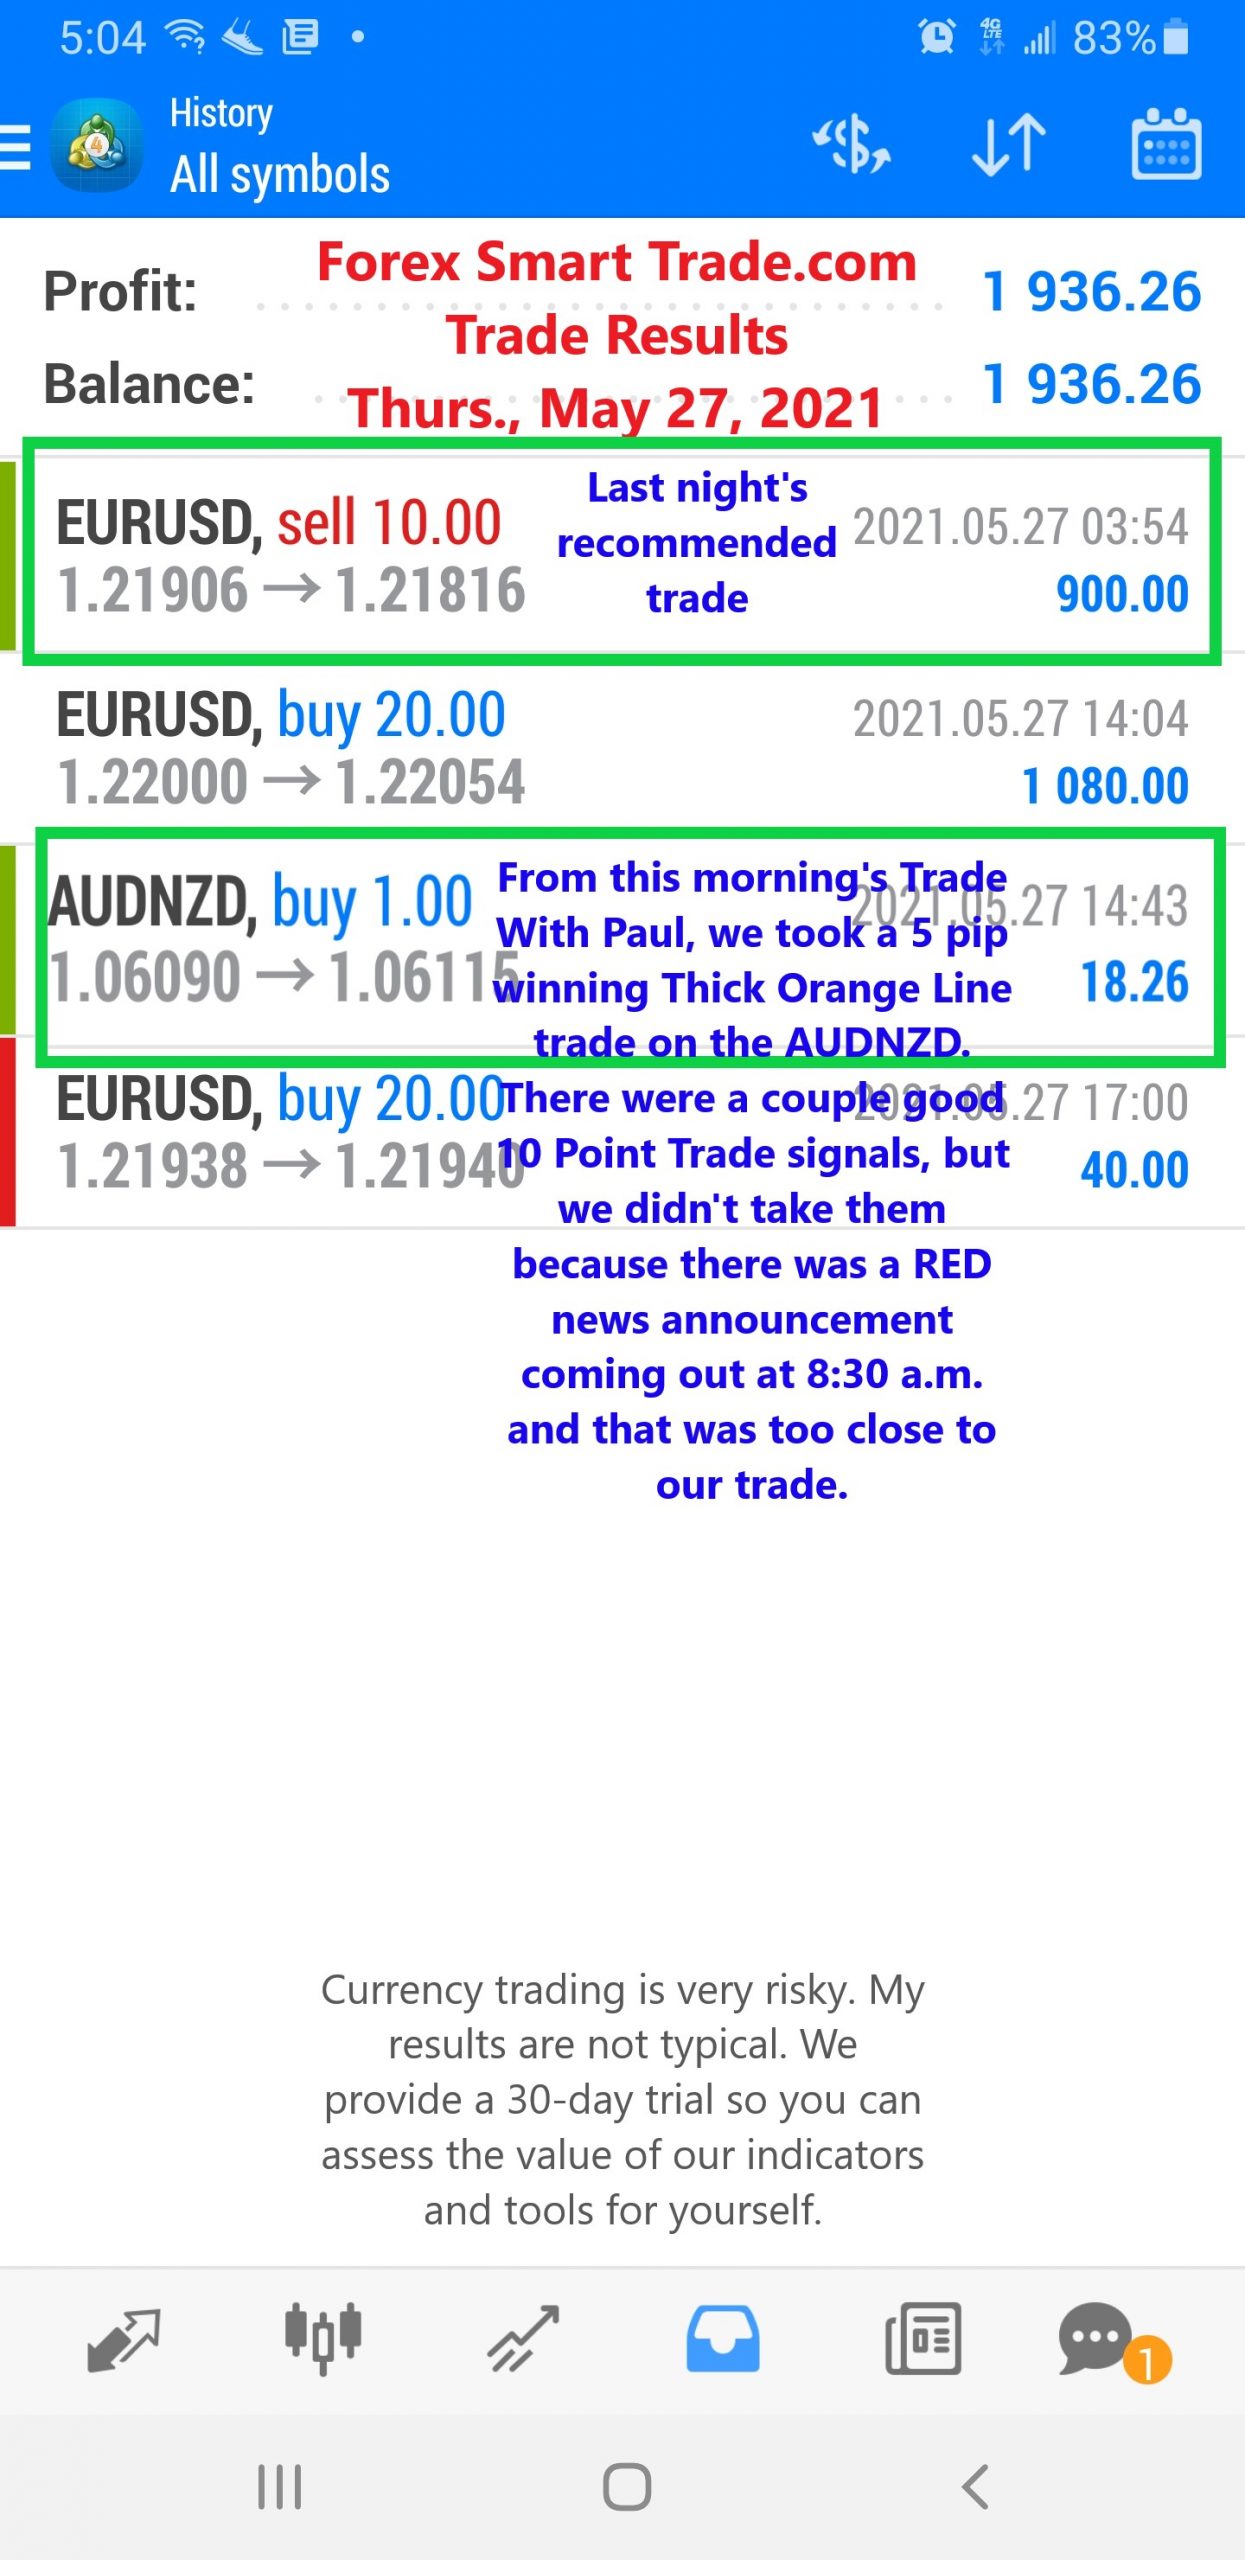 Trade Results Thursday, May 27, 2021 - Forex Smart Trade